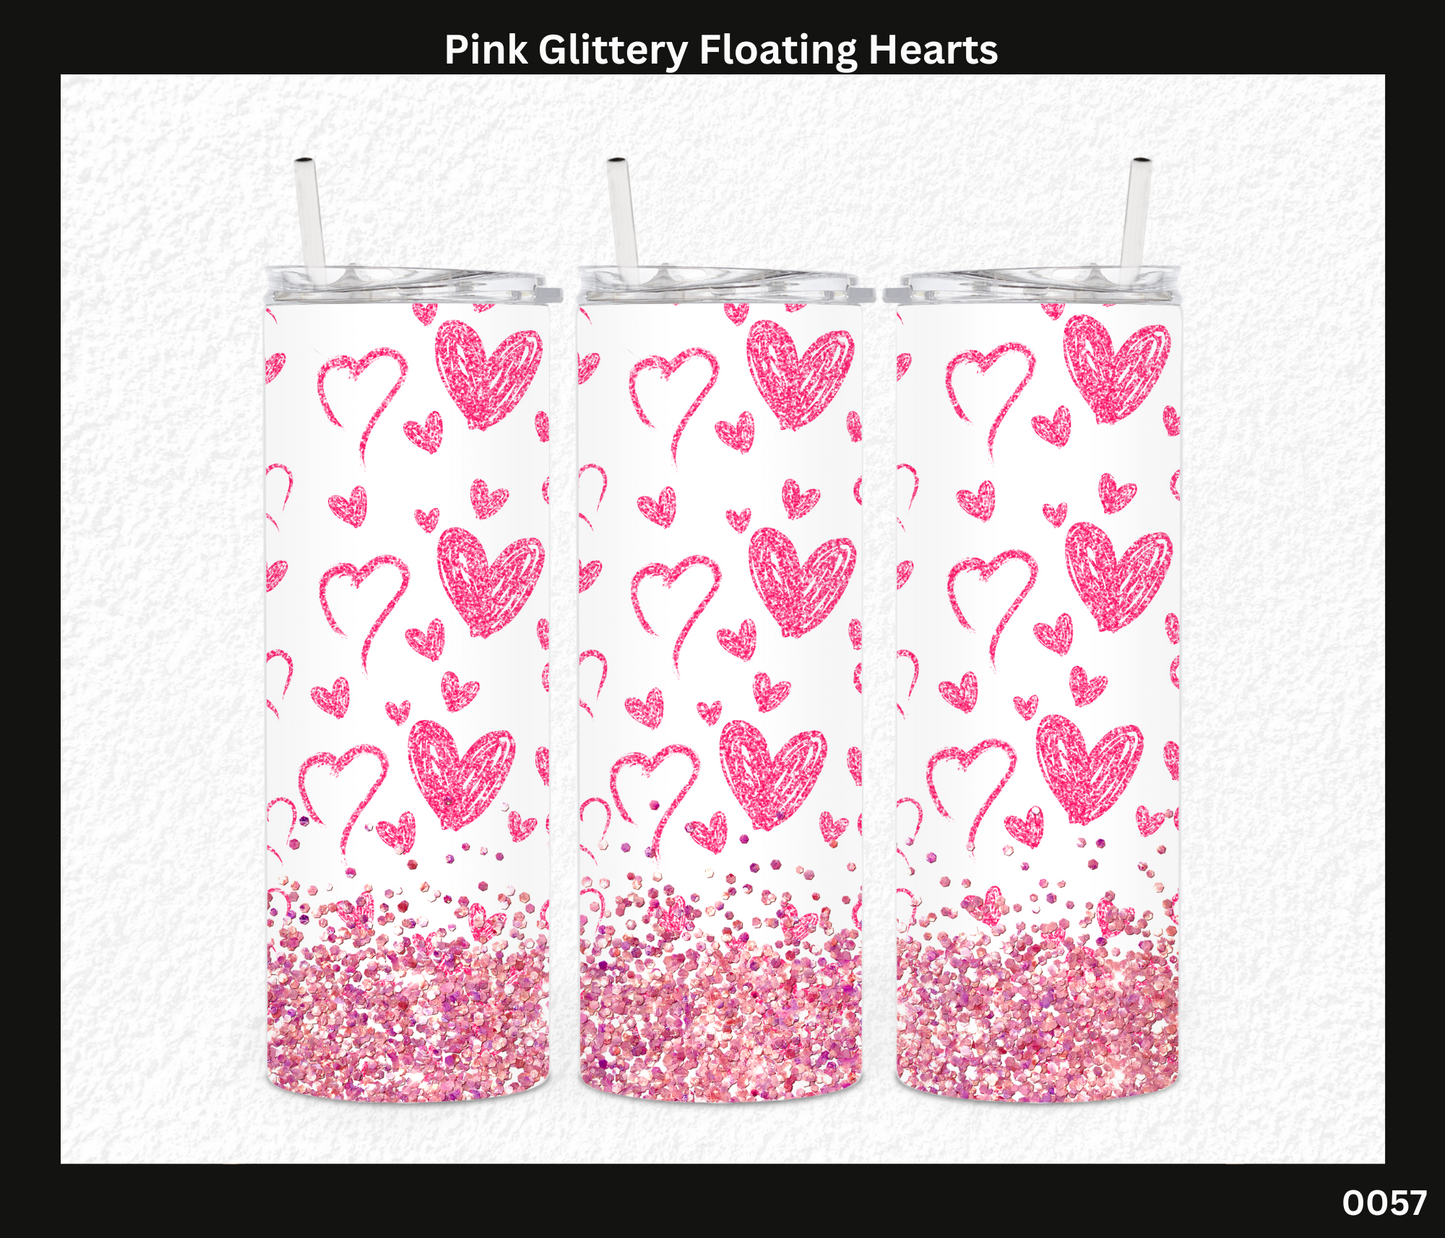 Pink Glittery Floating Hearts